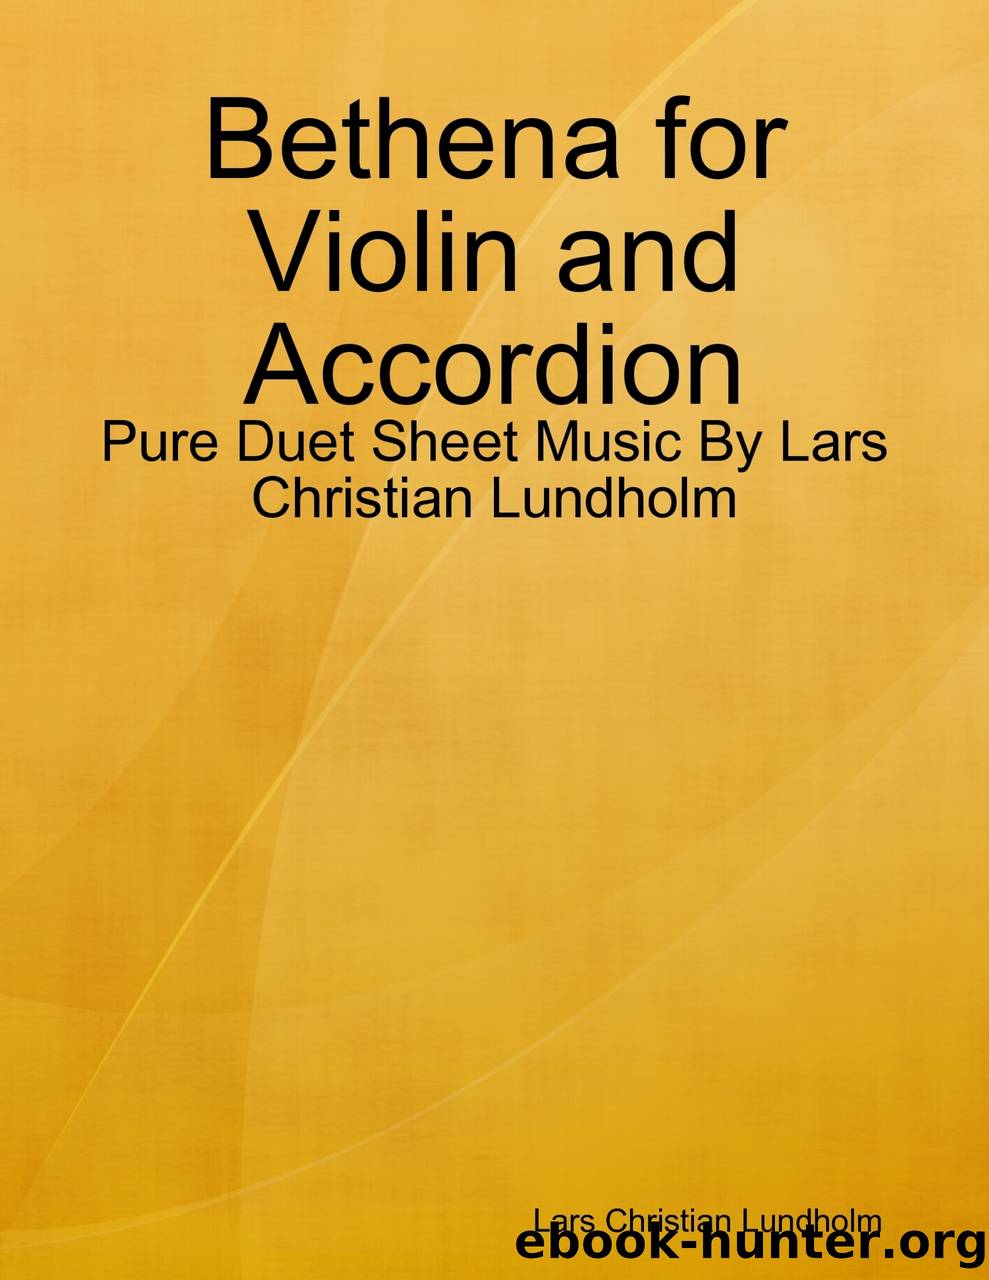 Bethena for Violin and Accordion - Pure Duet Sheet Music By Lars Christian Lundholm by Lars Christian Lundholm